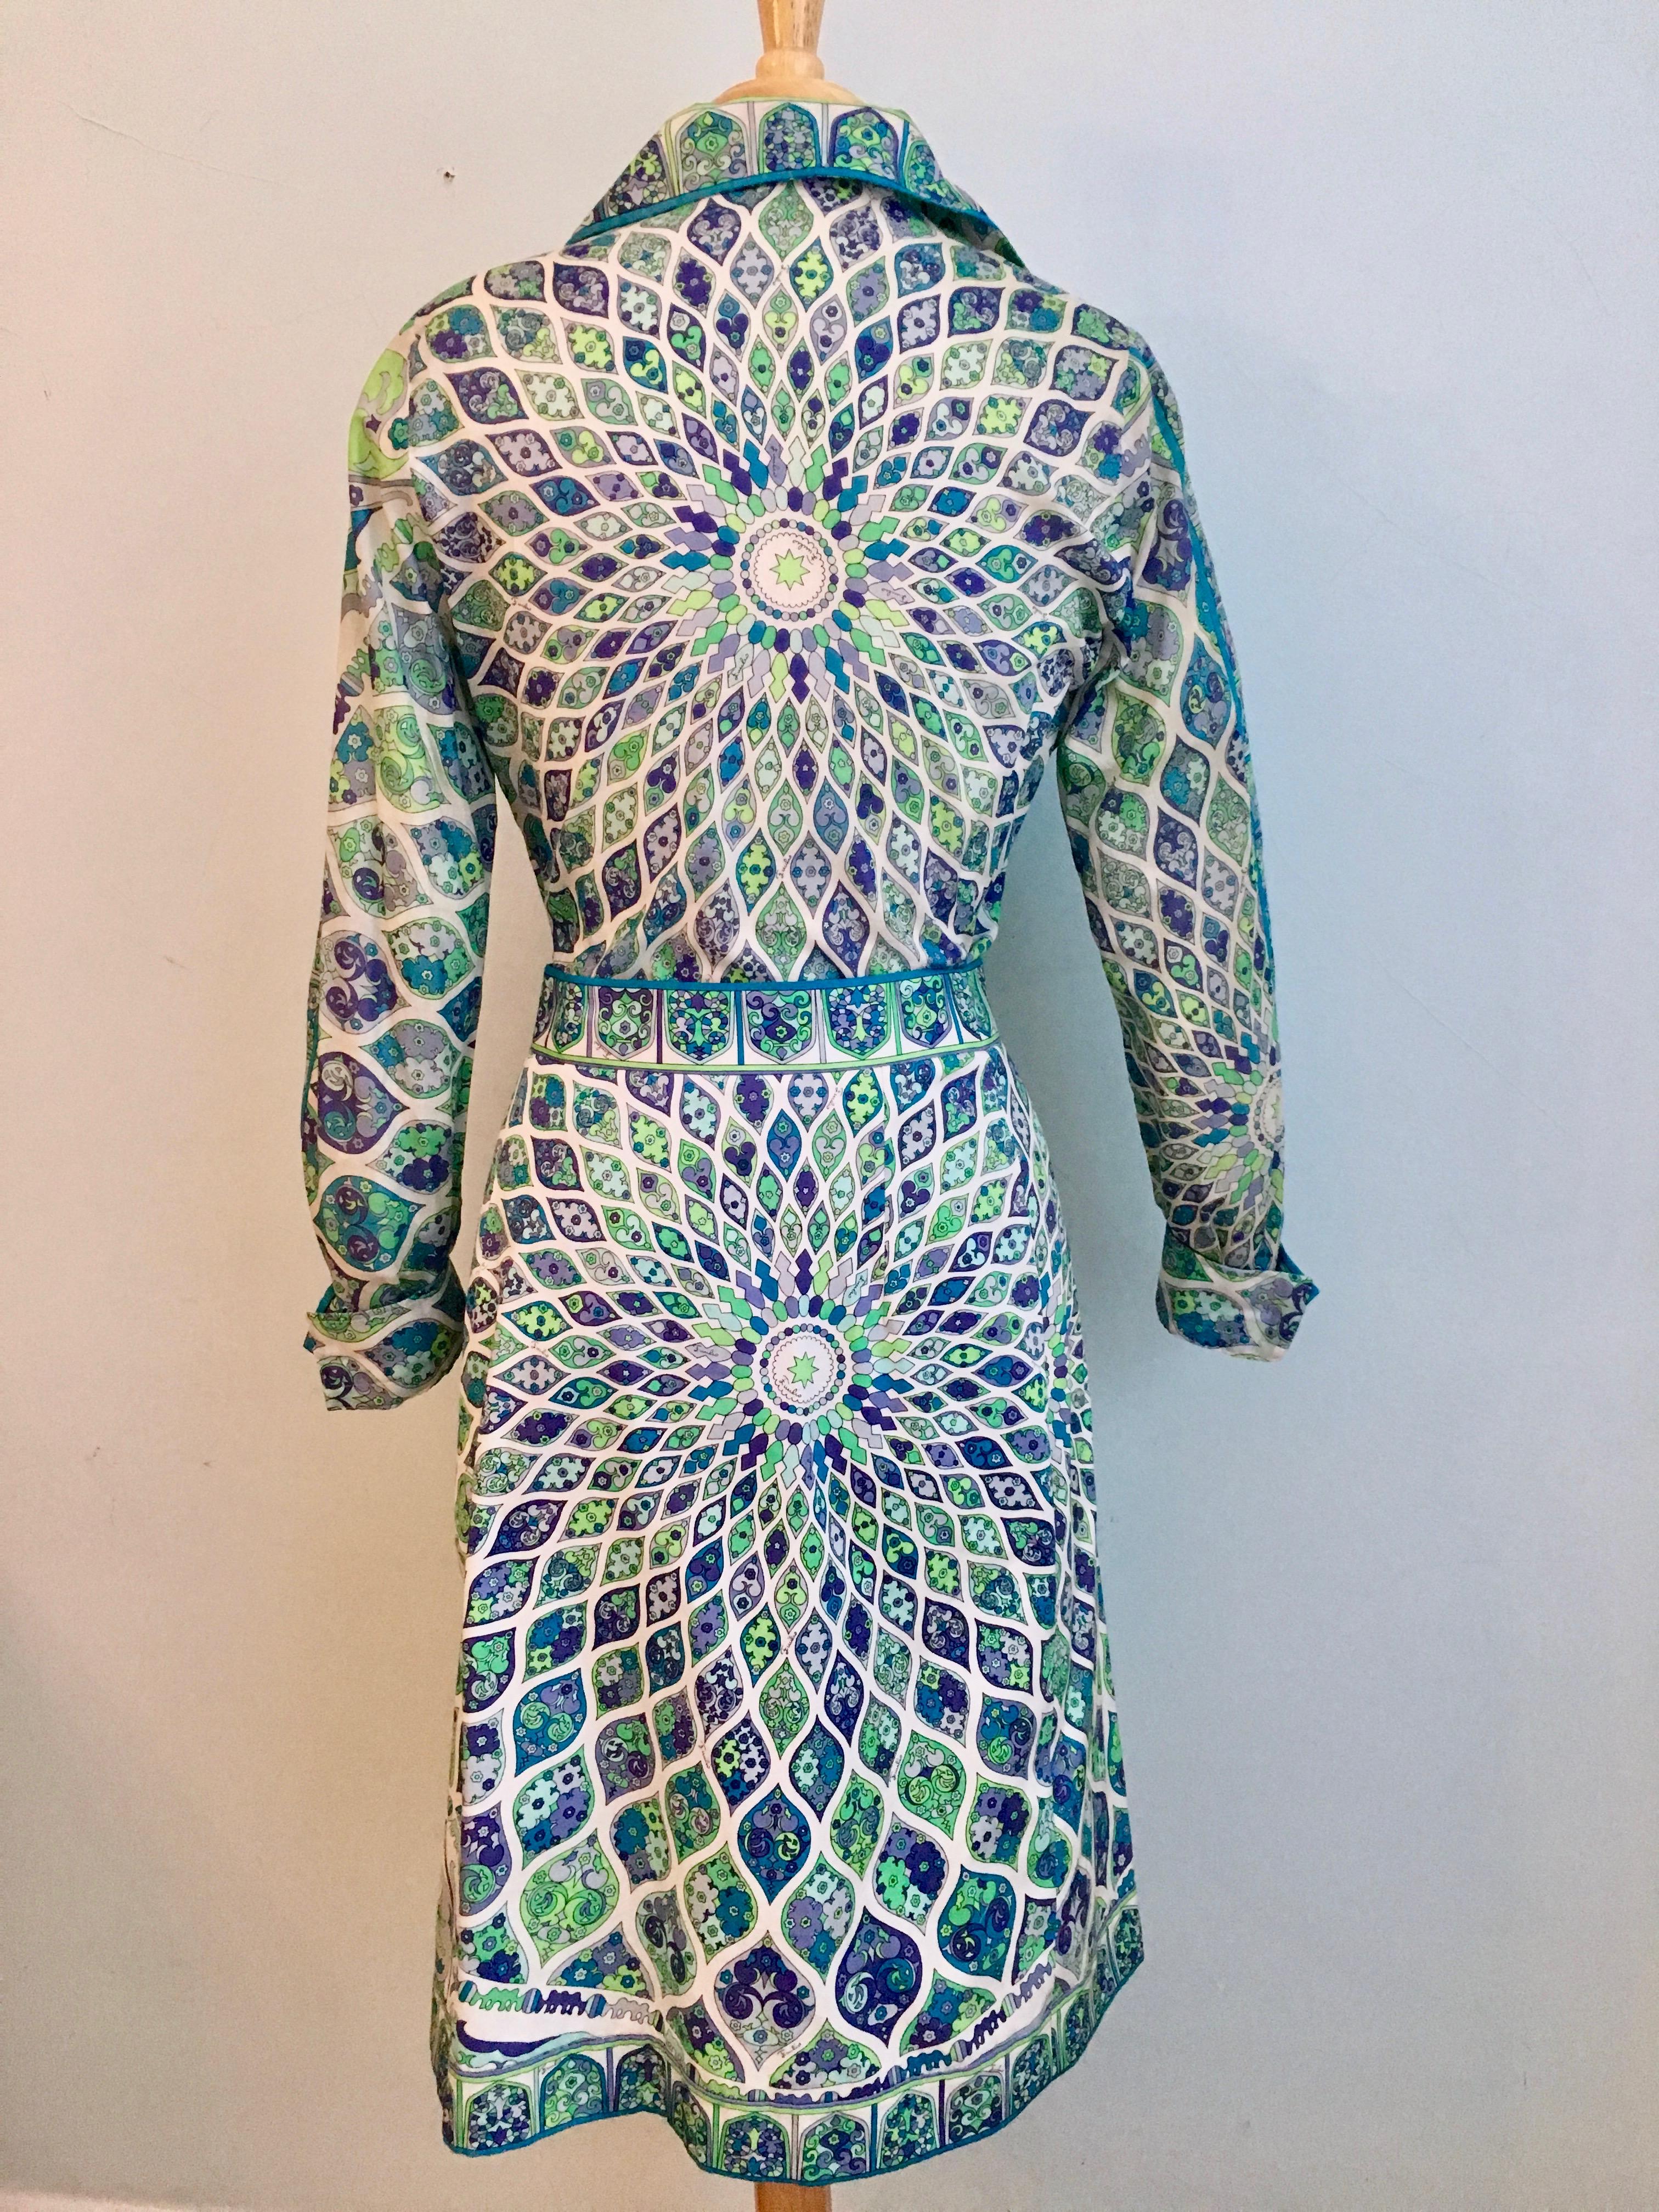 Emilio Pucci Green, Lavender, Blue and Purple Cotton Blouse and Skirt Set 1960s For Sale 1